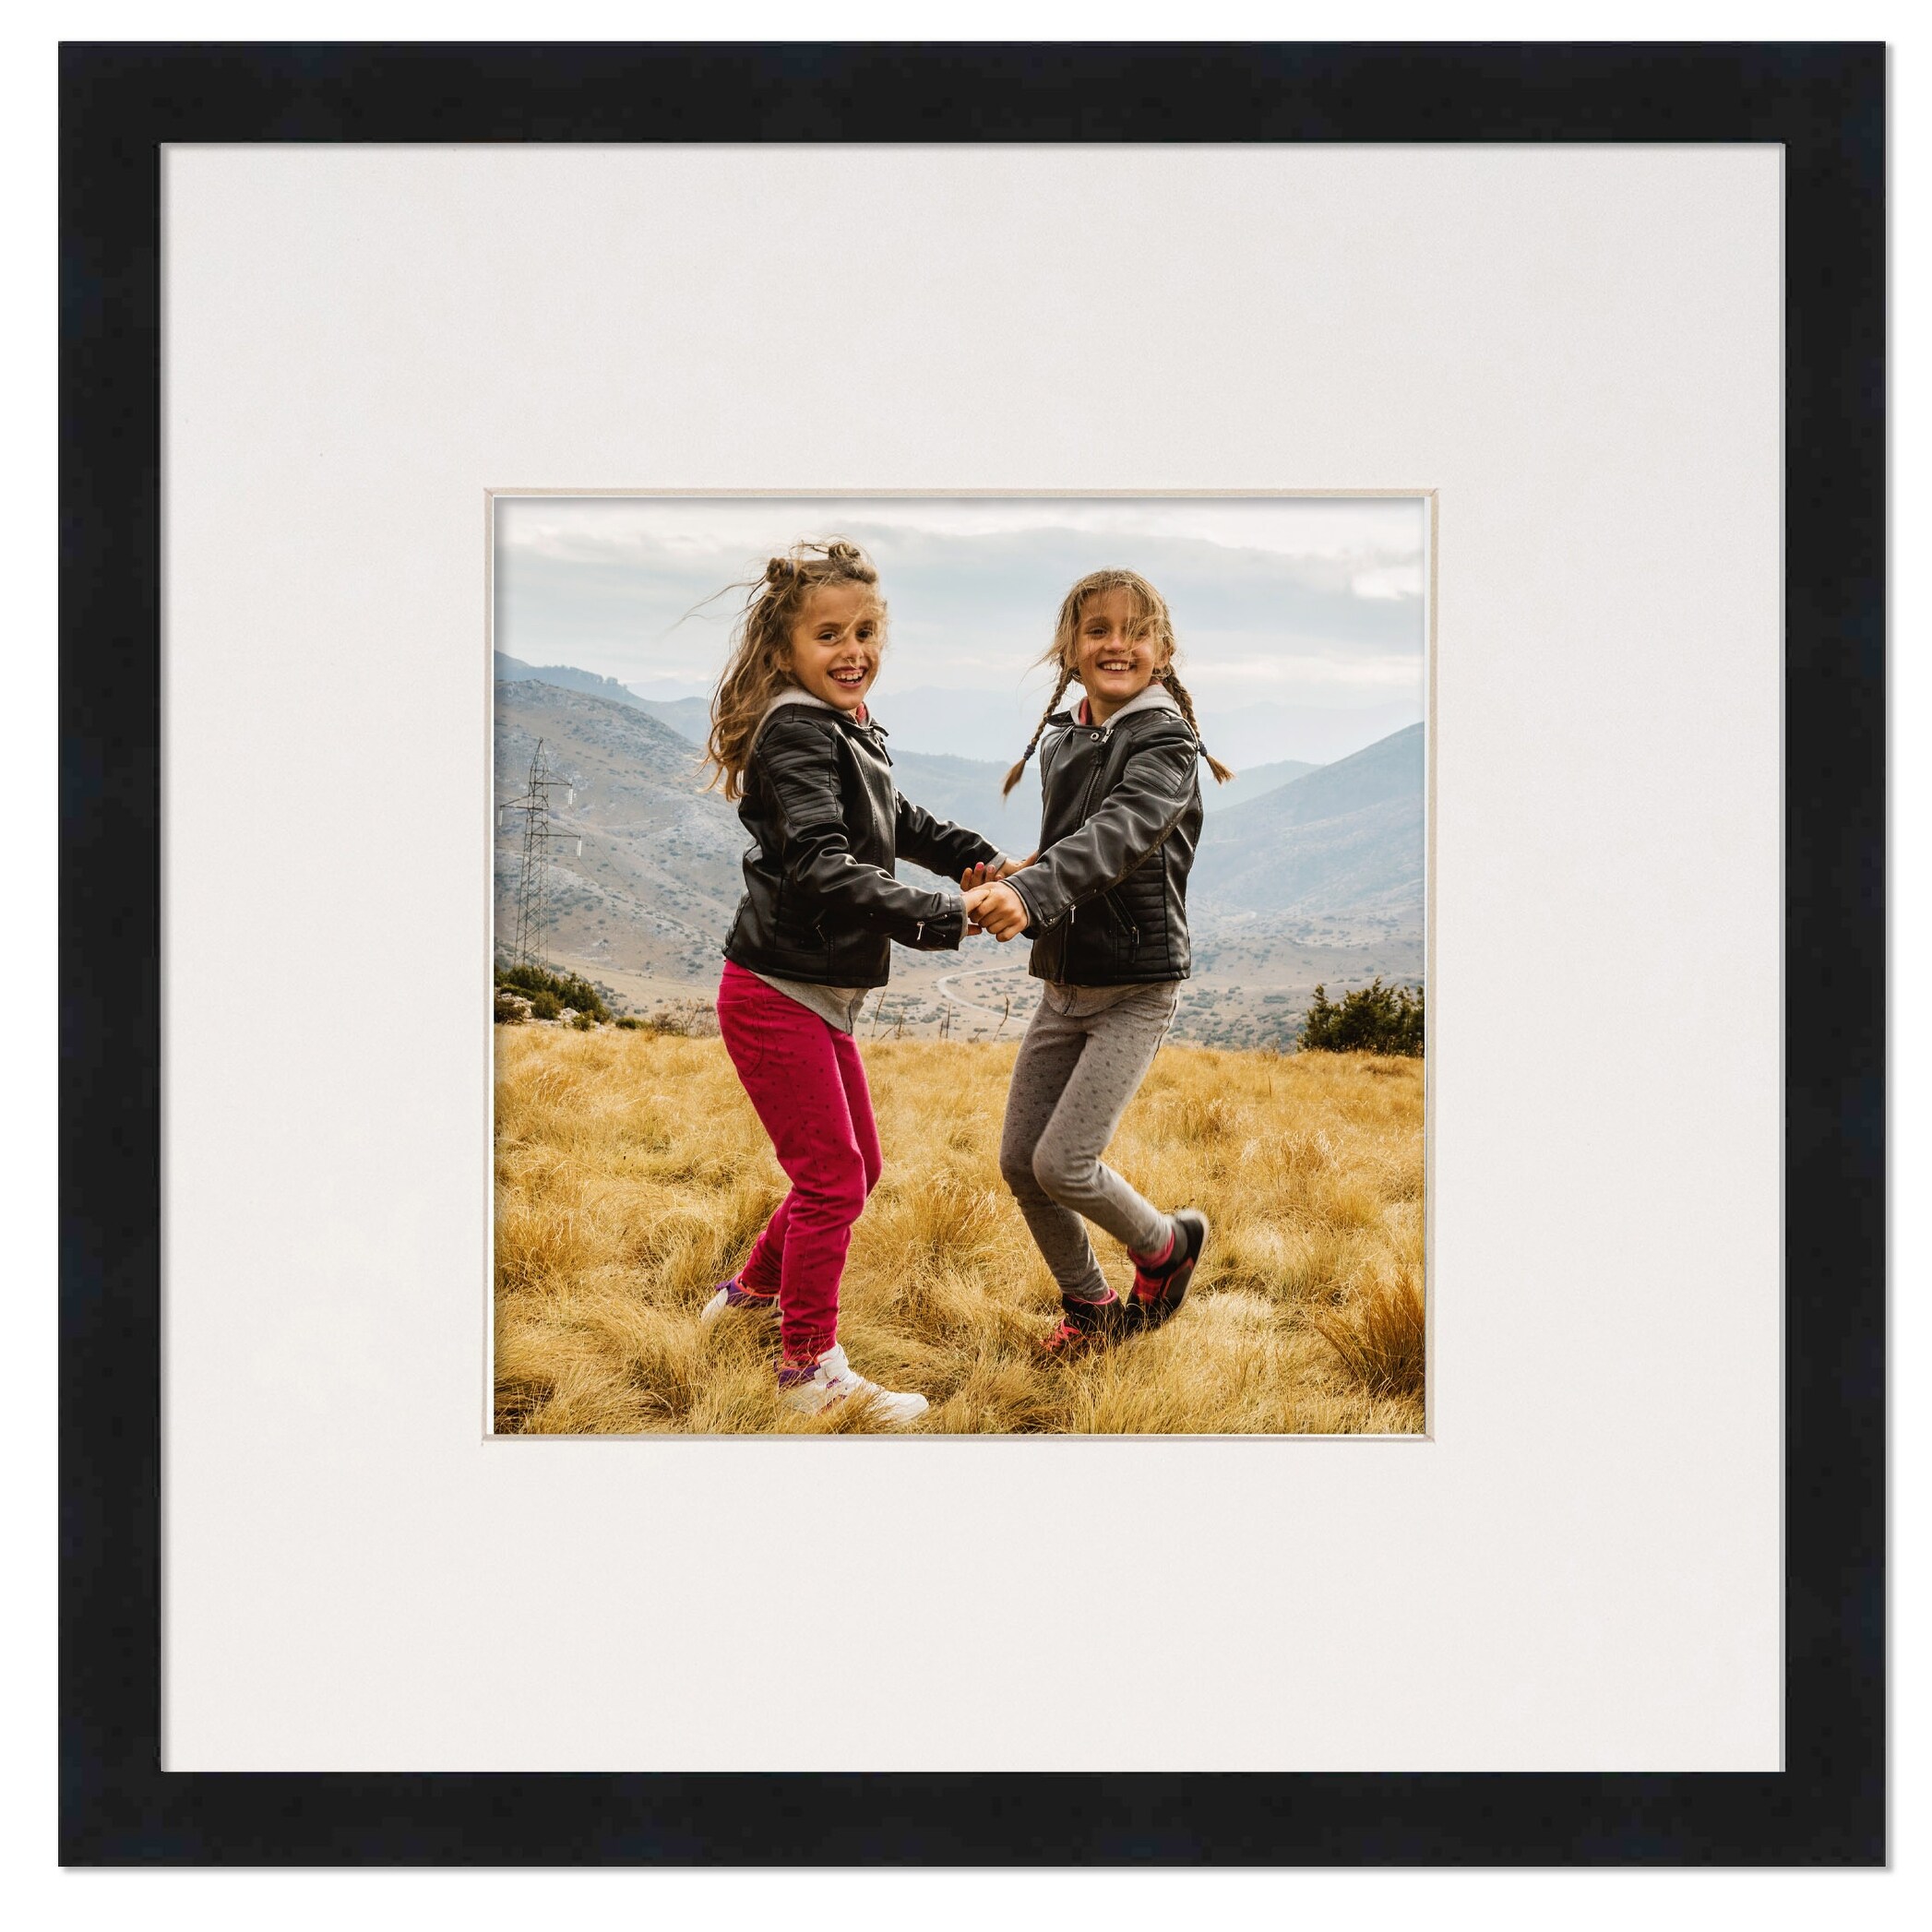 8x8 Frame with Mat - White 11x11 Frame Wood Made to Display Print or Poster  Measuring 8 x 8 Inches with Black Photo Mat - On Sale - Bed Bath & Beyond -  38554300